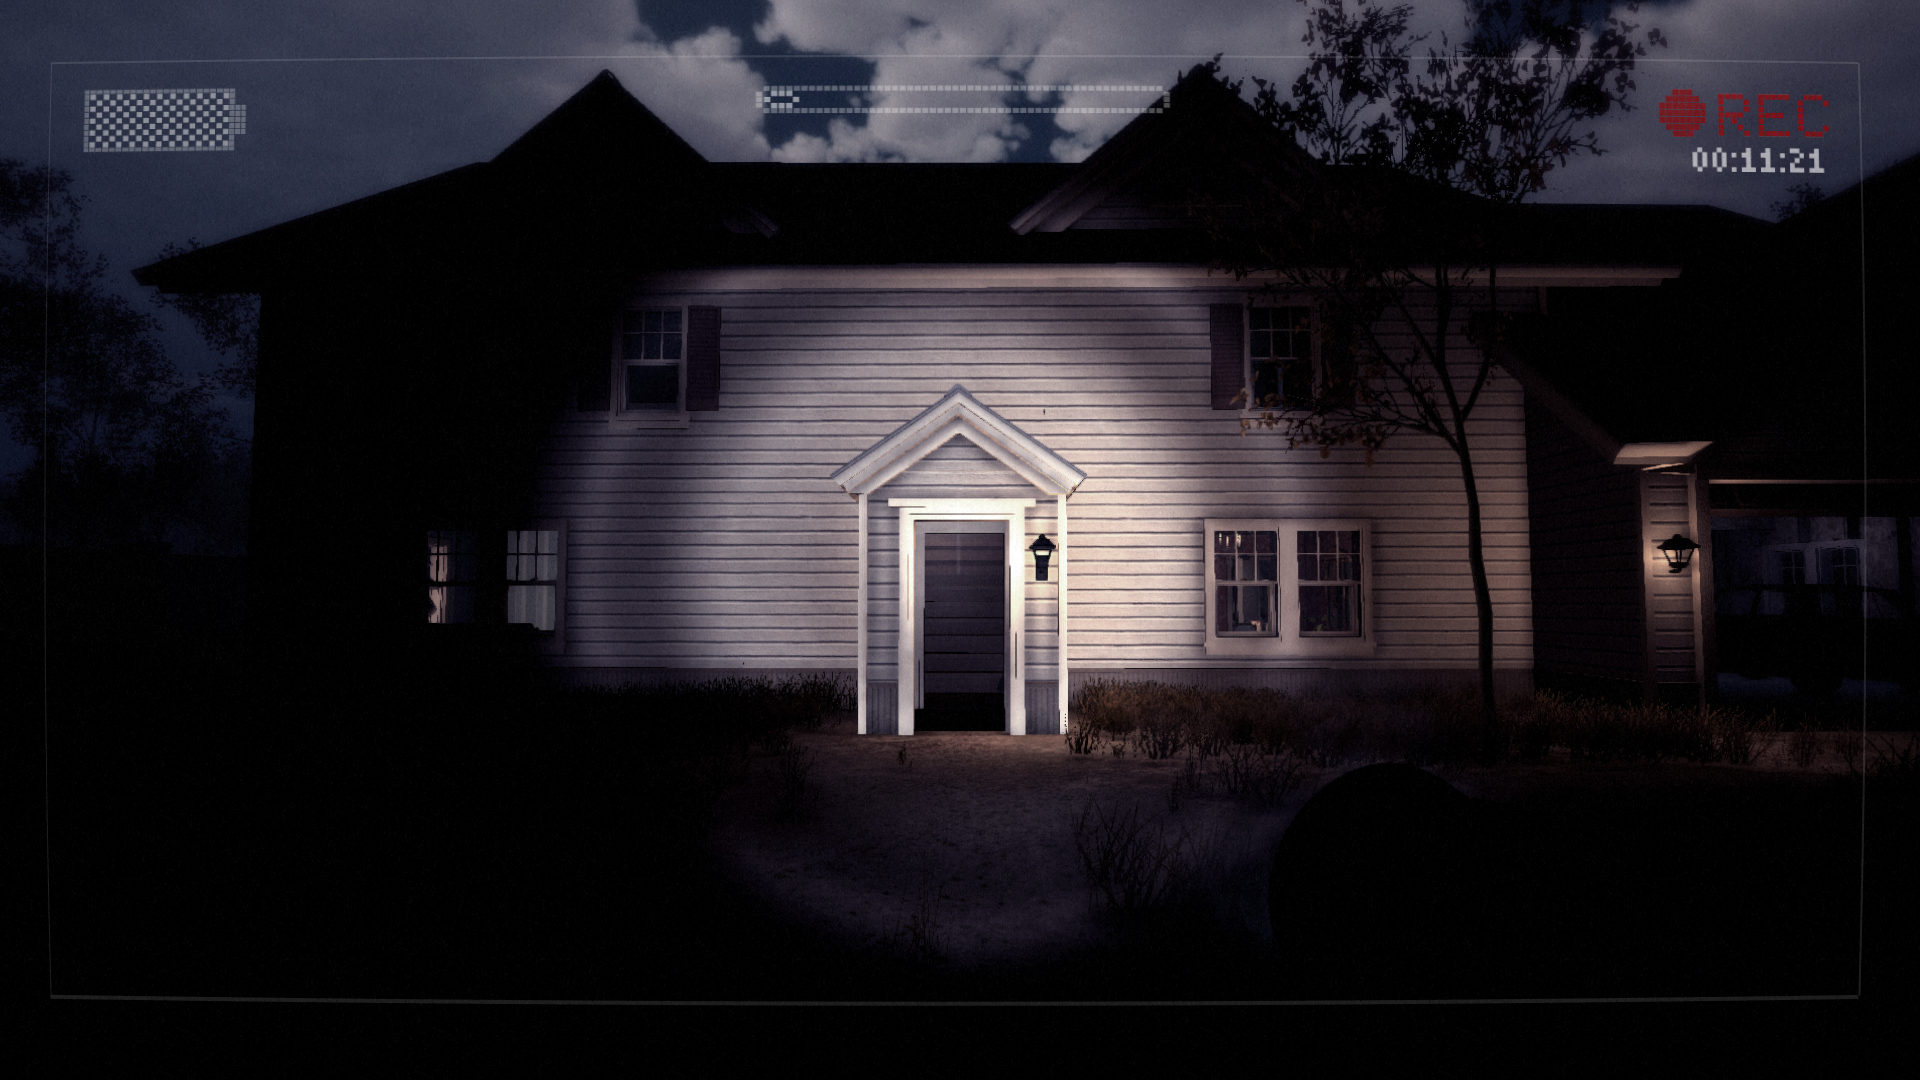 download slender the arrival game for free